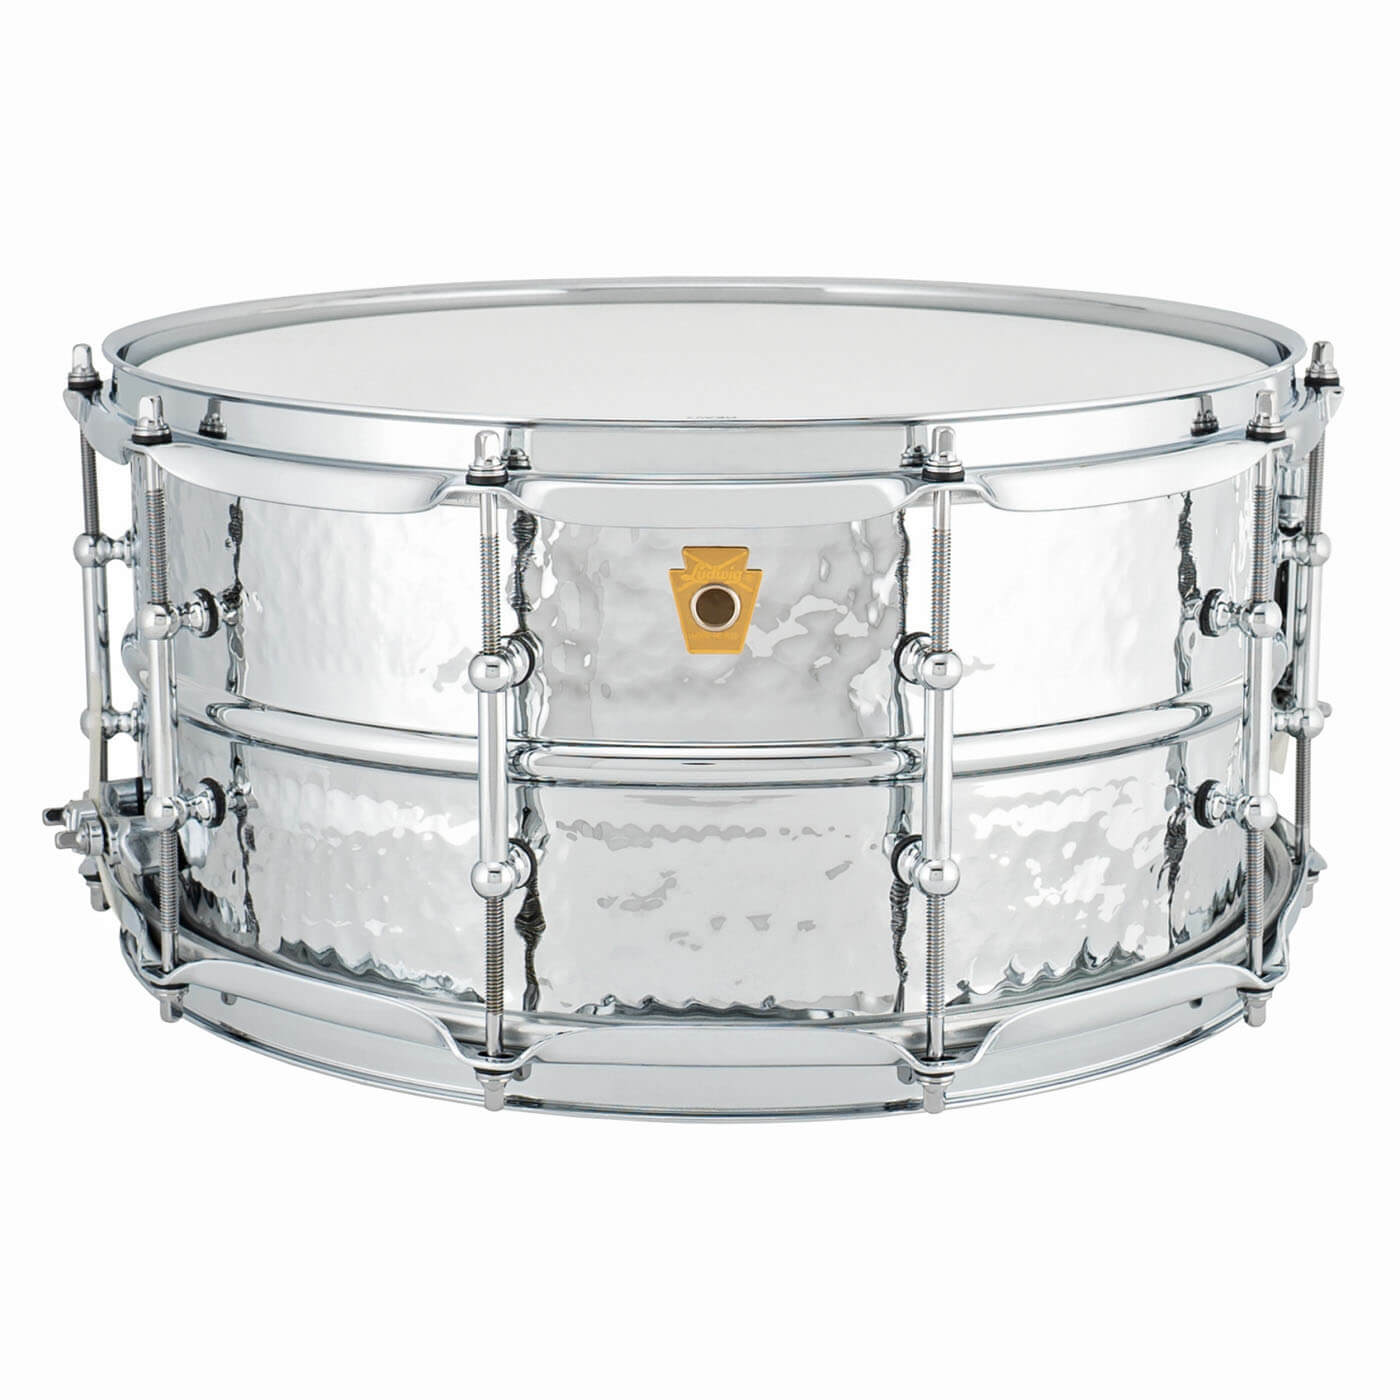 Ludwig Hammered Brass with Tube Lugs 6.5 x 14 (LB422BKT) – Dave's Drum Shop